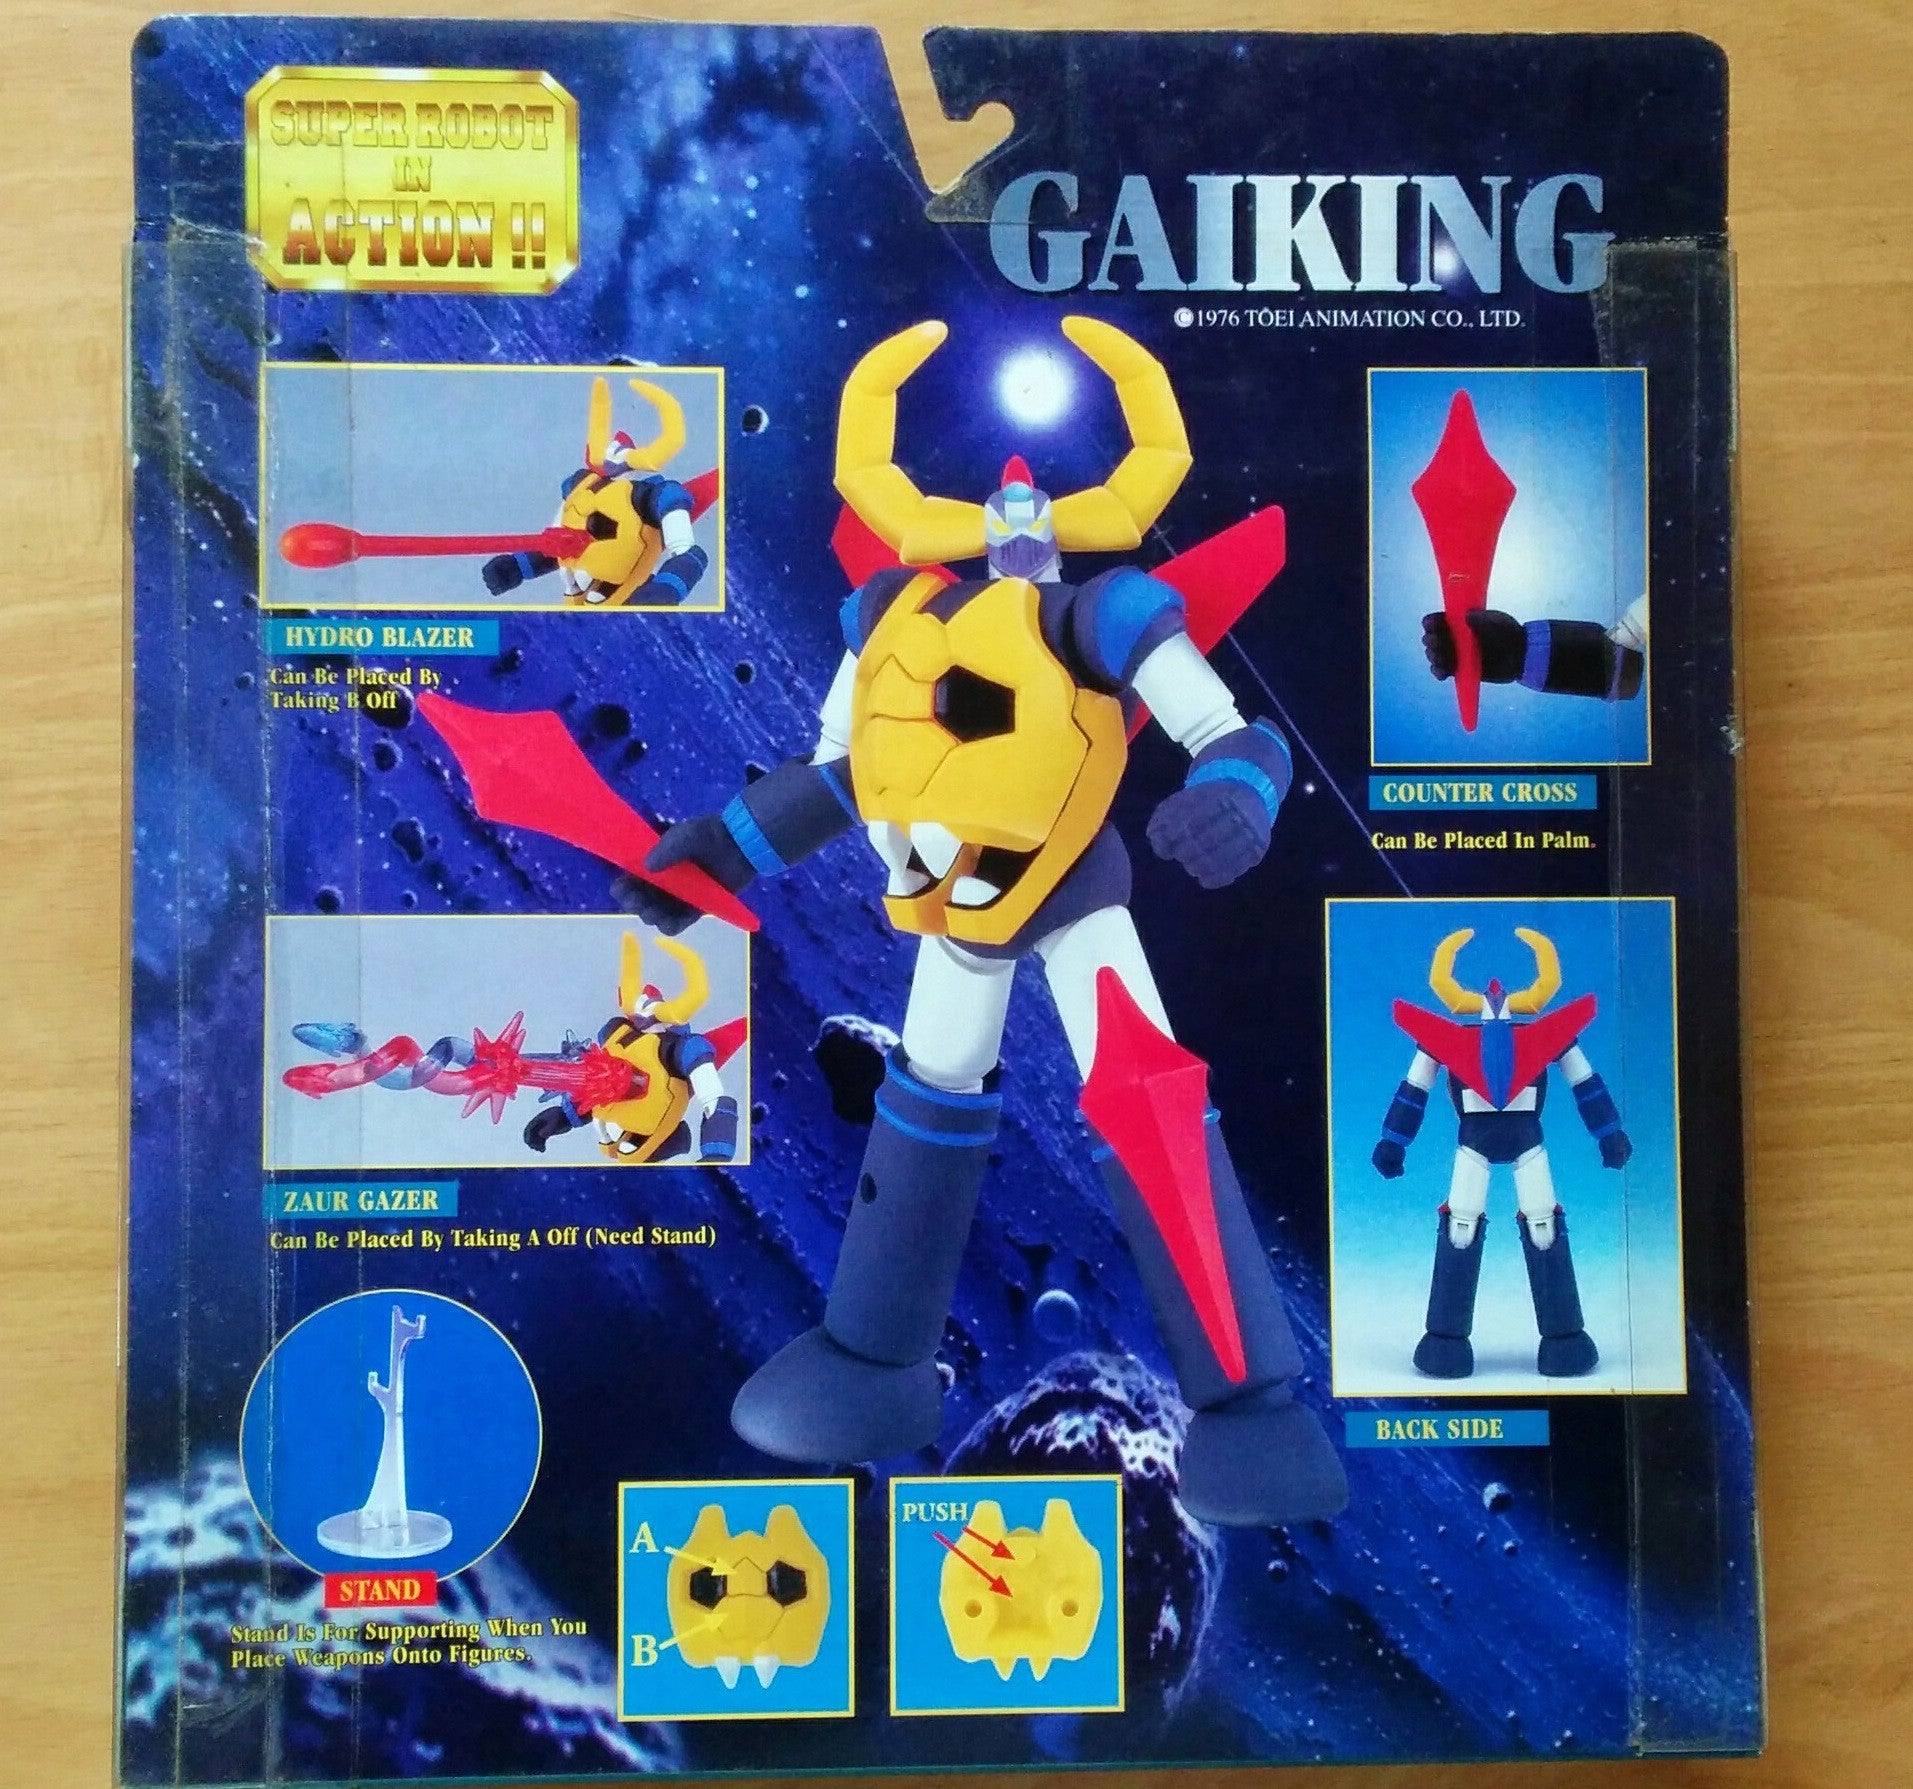 Bandai 1999 Super Robot In Action Gaiking Collection Figure - Lavits Figure
 - 2